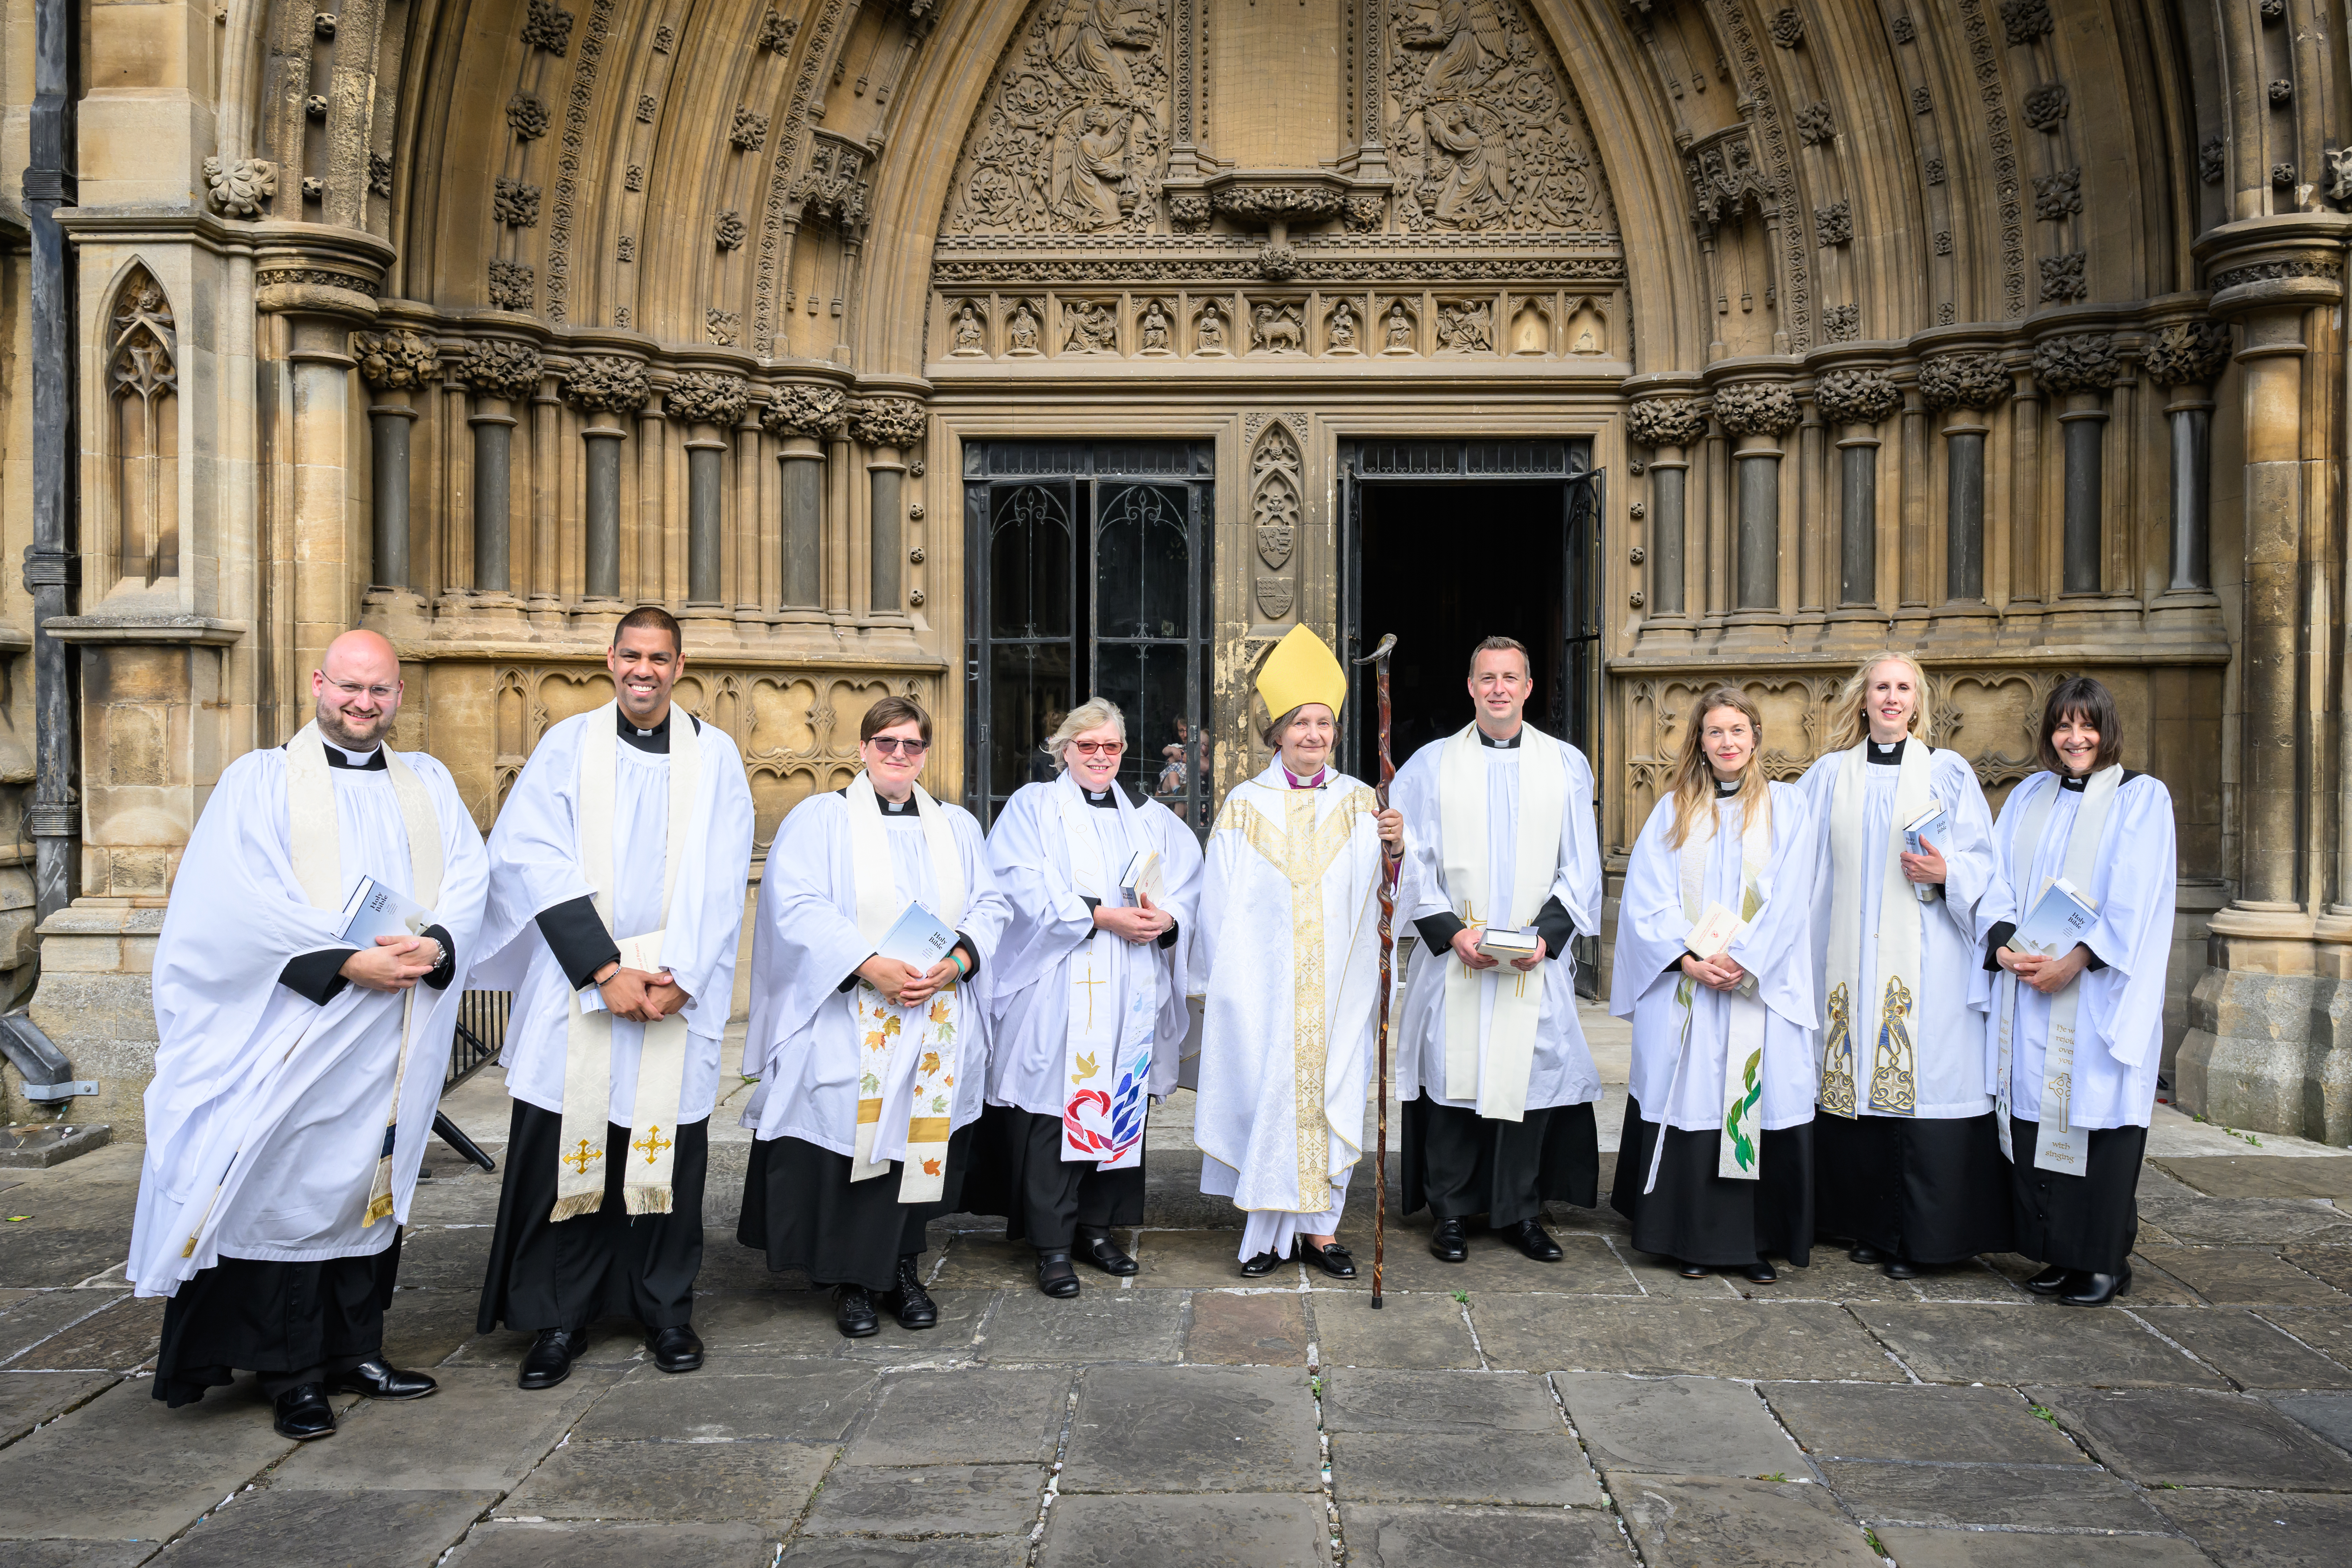 Bishop Viv with newly ordained Priests, outside Bristol Cathedral.